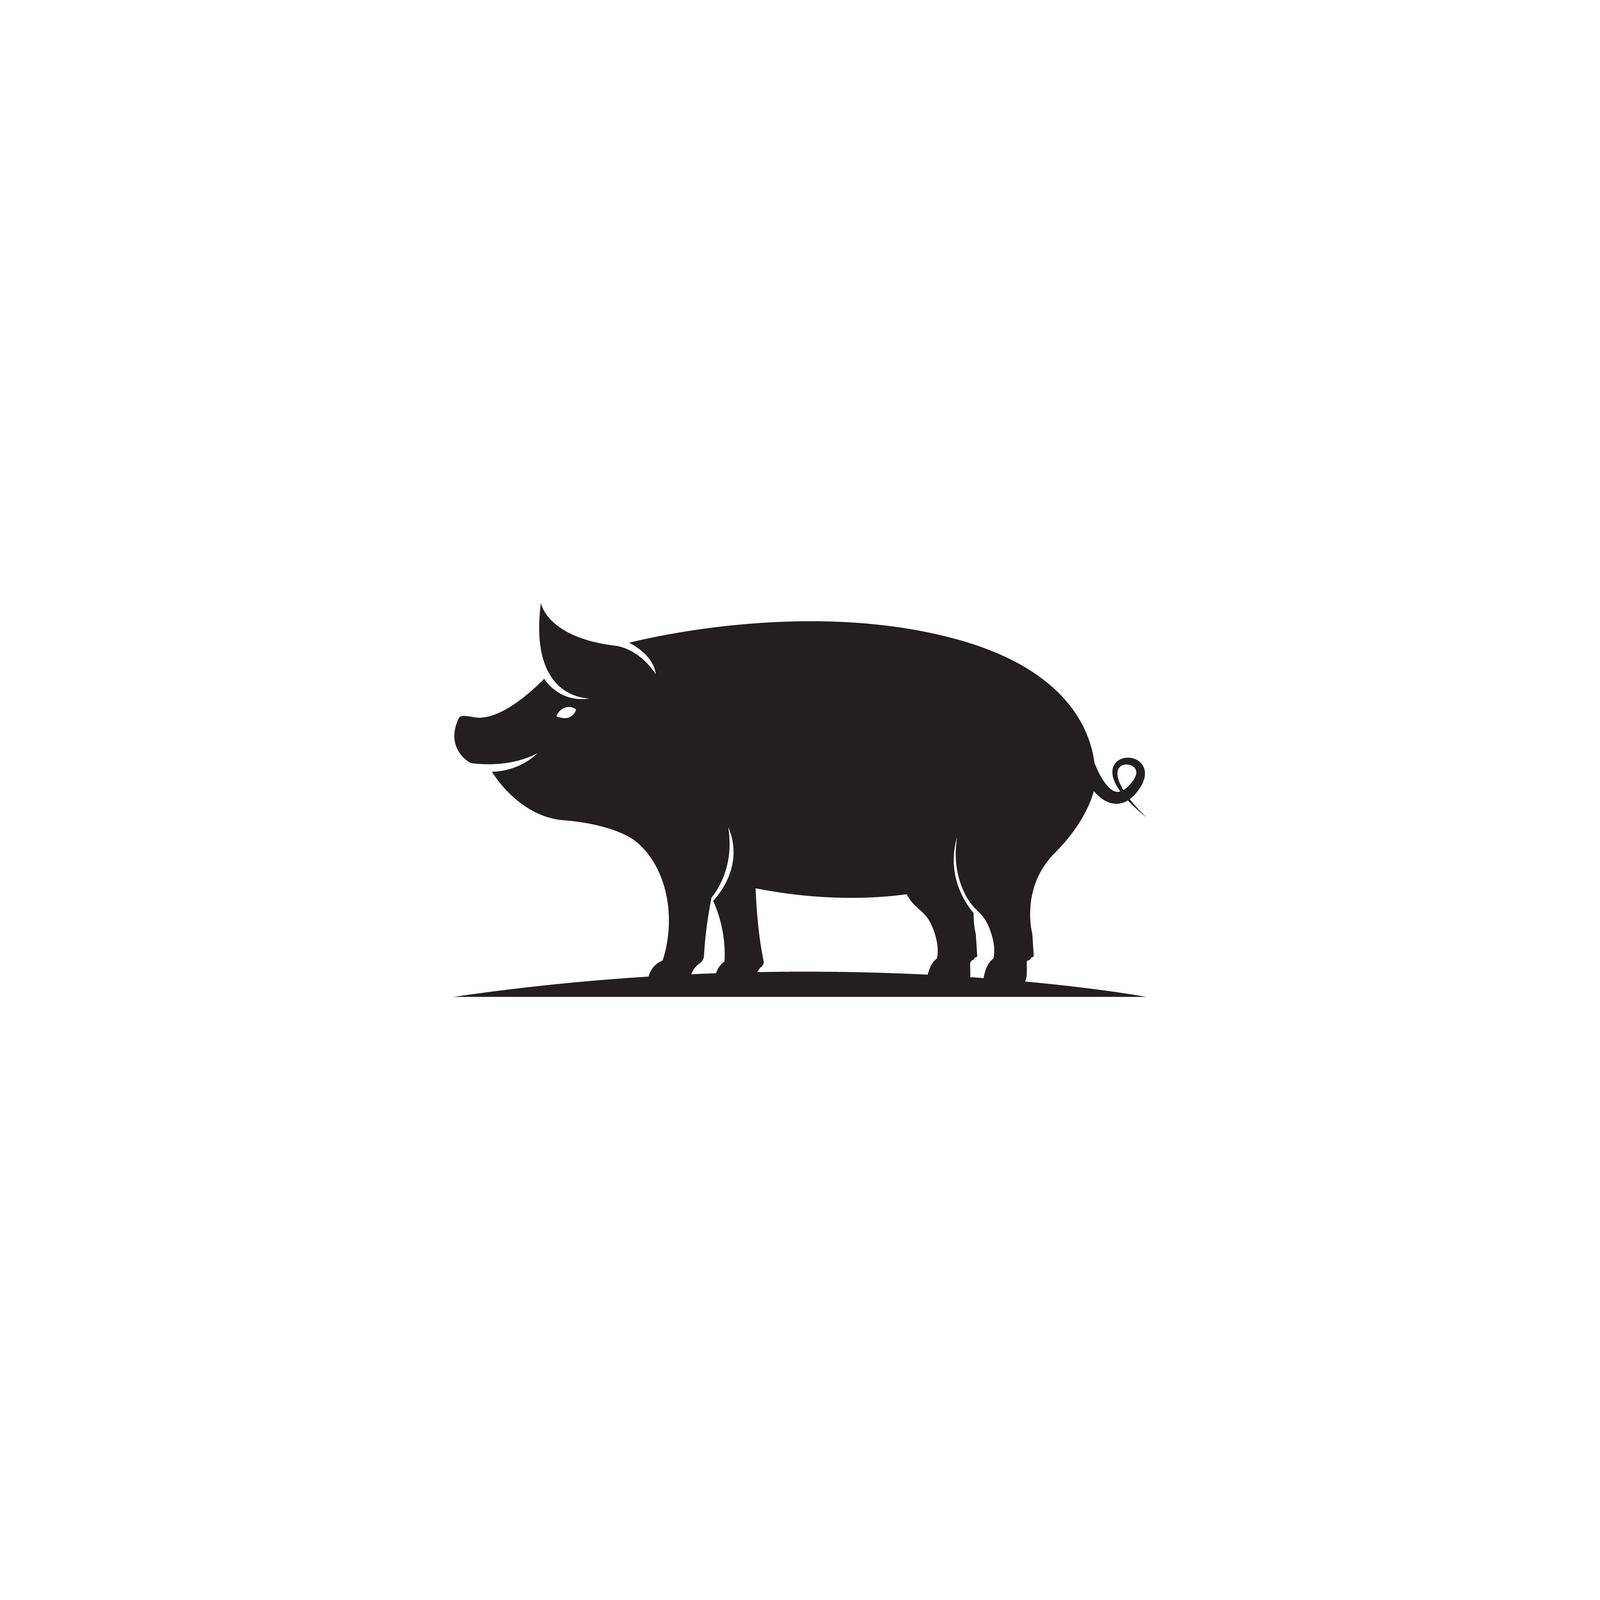 Pig icon. by rnking